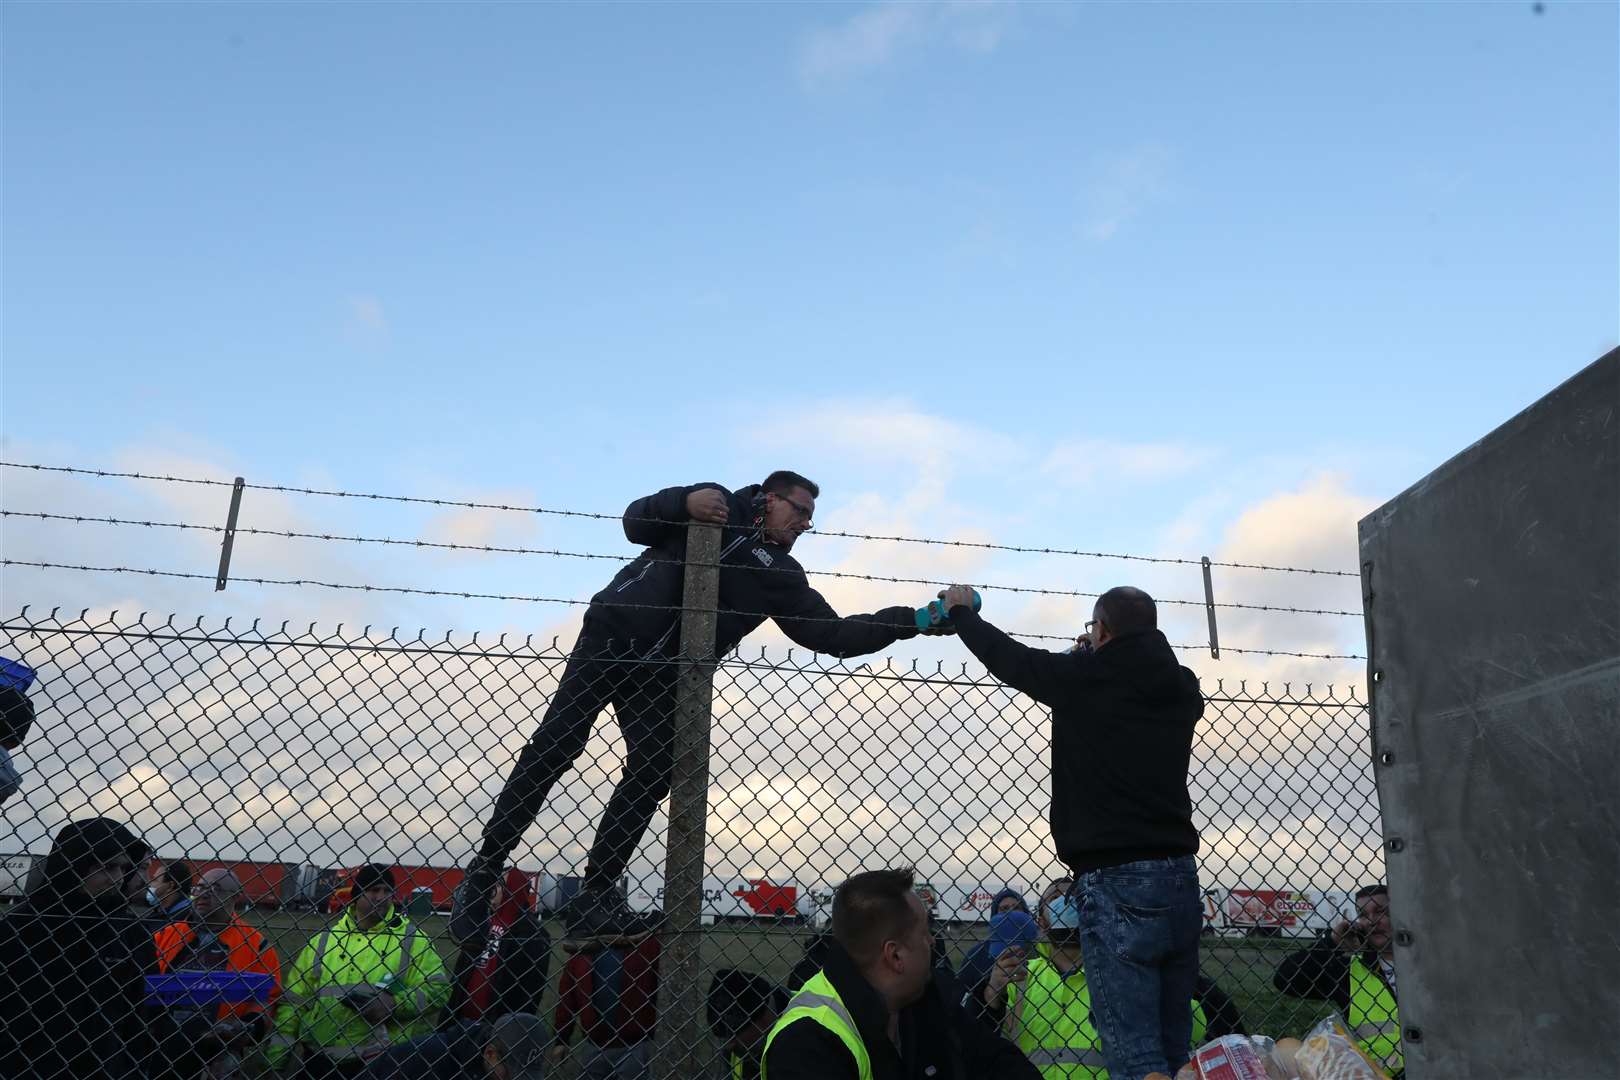 Cans of baked beans are handed over the fence. Picture: Barry Goodwin